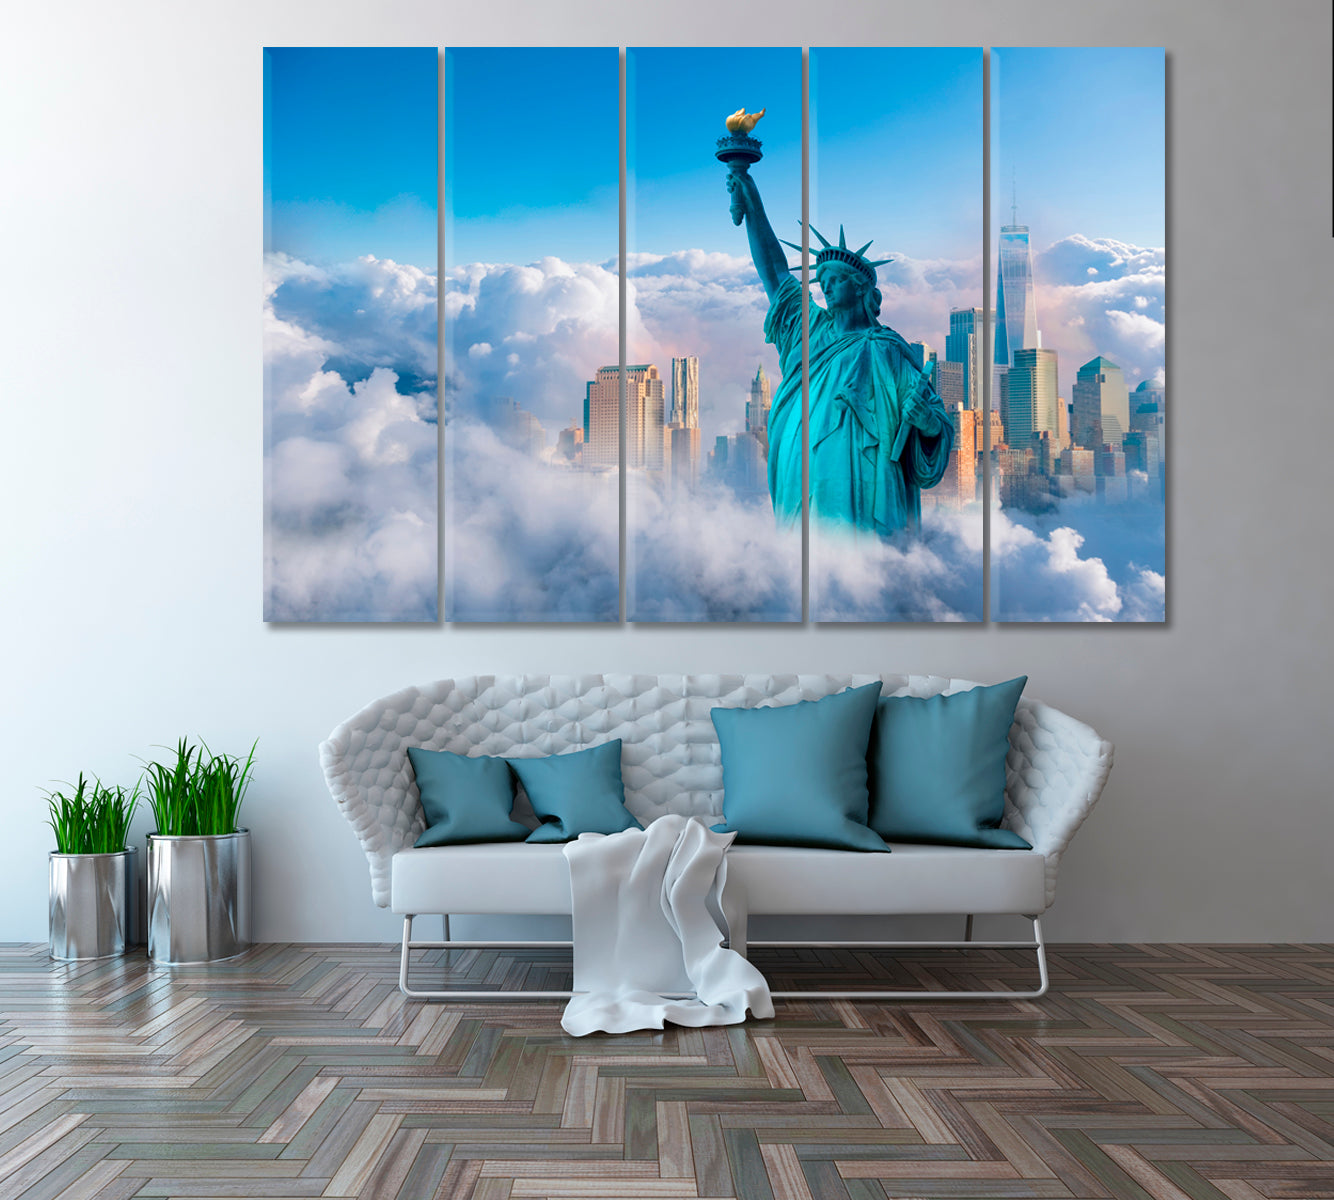 New York City with Statue of Liberty in Clouds Canvas Print ArtLexy 5 Panels 36"x24" inches 